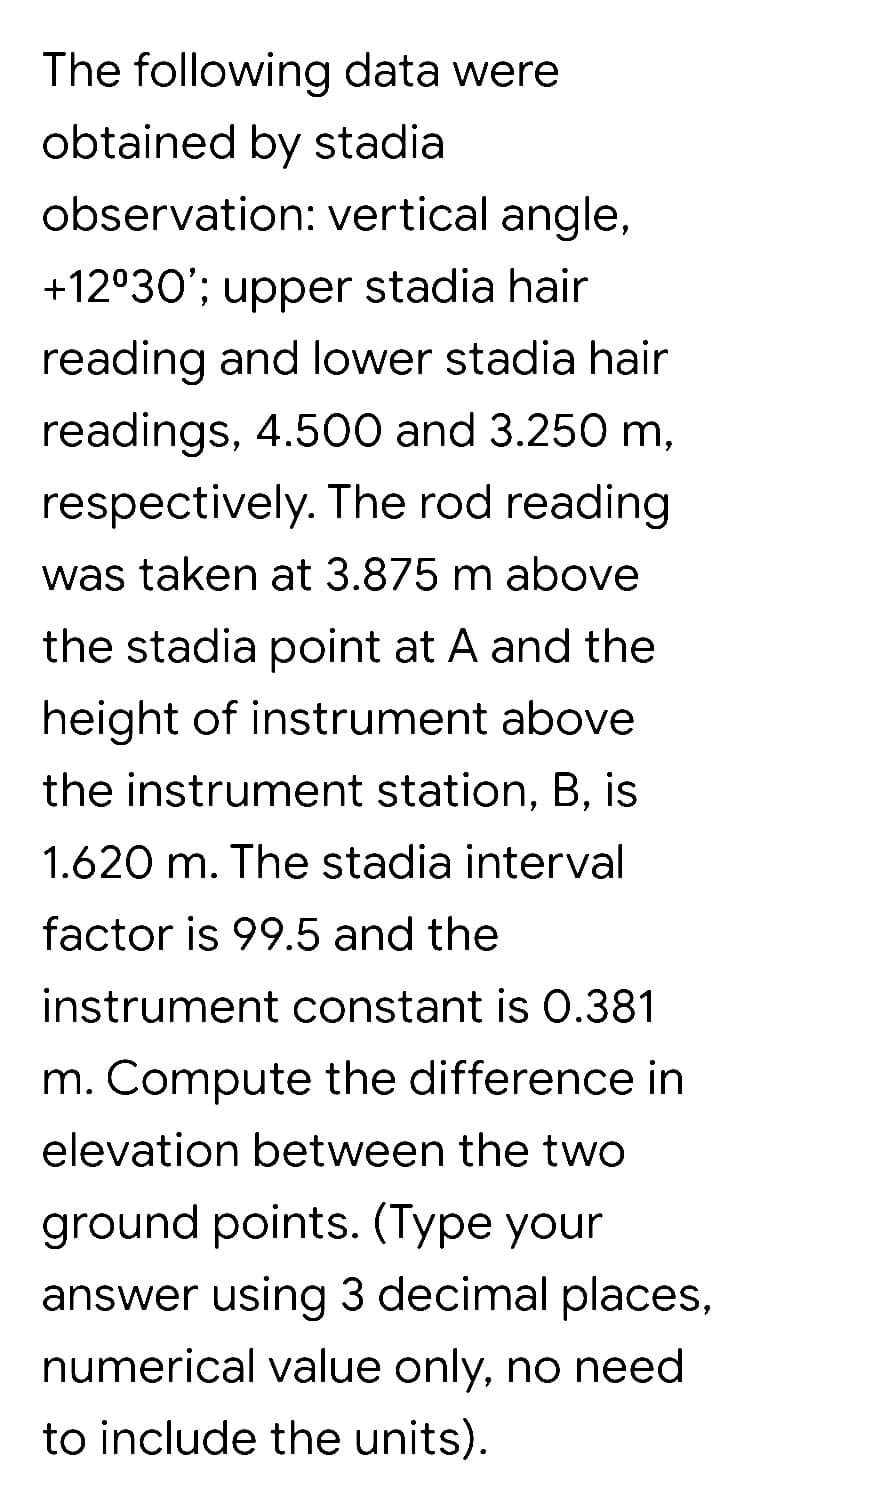 The following data were
obtained by stadia
observation: vertical angle,
+12°30'; upper stadia hair
reading and lower stadia hair
readings, 4.500 and 3.250 m,
respectively. The rod reading
was taken at 3.875 m above
the stadia point at A and the
height of instrument above
the instrument station, B, is
1.620 m. The stadia interval
factor is 99.5 and the
instrument constant is O.381
m. Compute the difference in
elevation between the two
ground points. (Type your
answer using 3 decimal places,
numerical value only, no need
to include the units).
